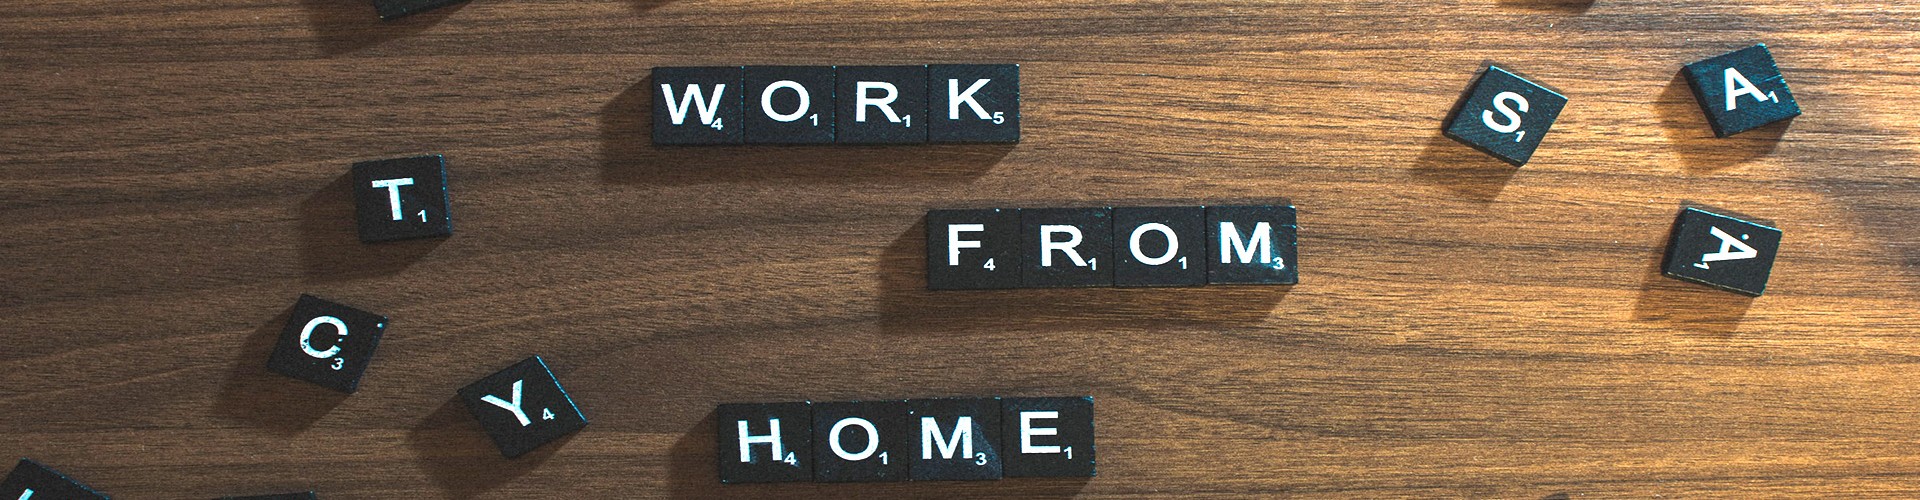 work from home in scrabble